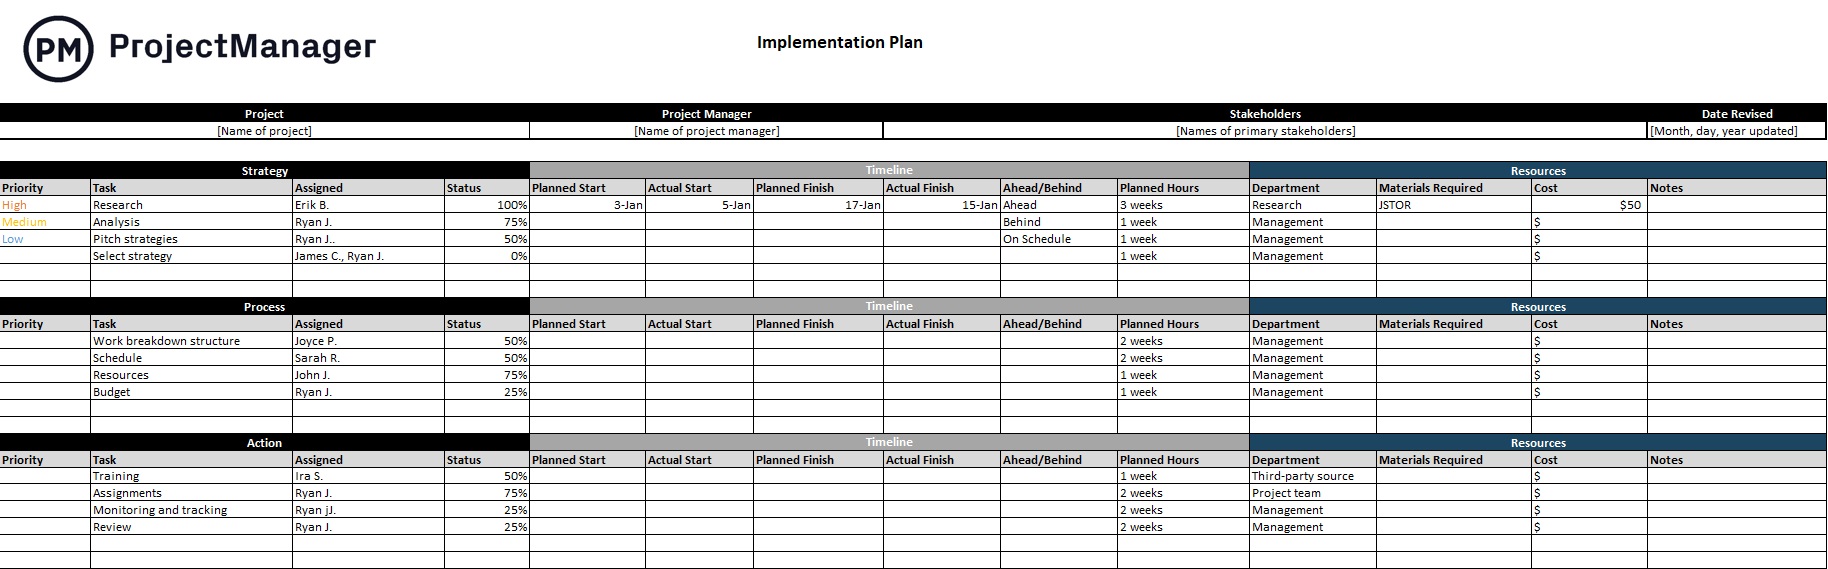 Implementation plan template for Excel